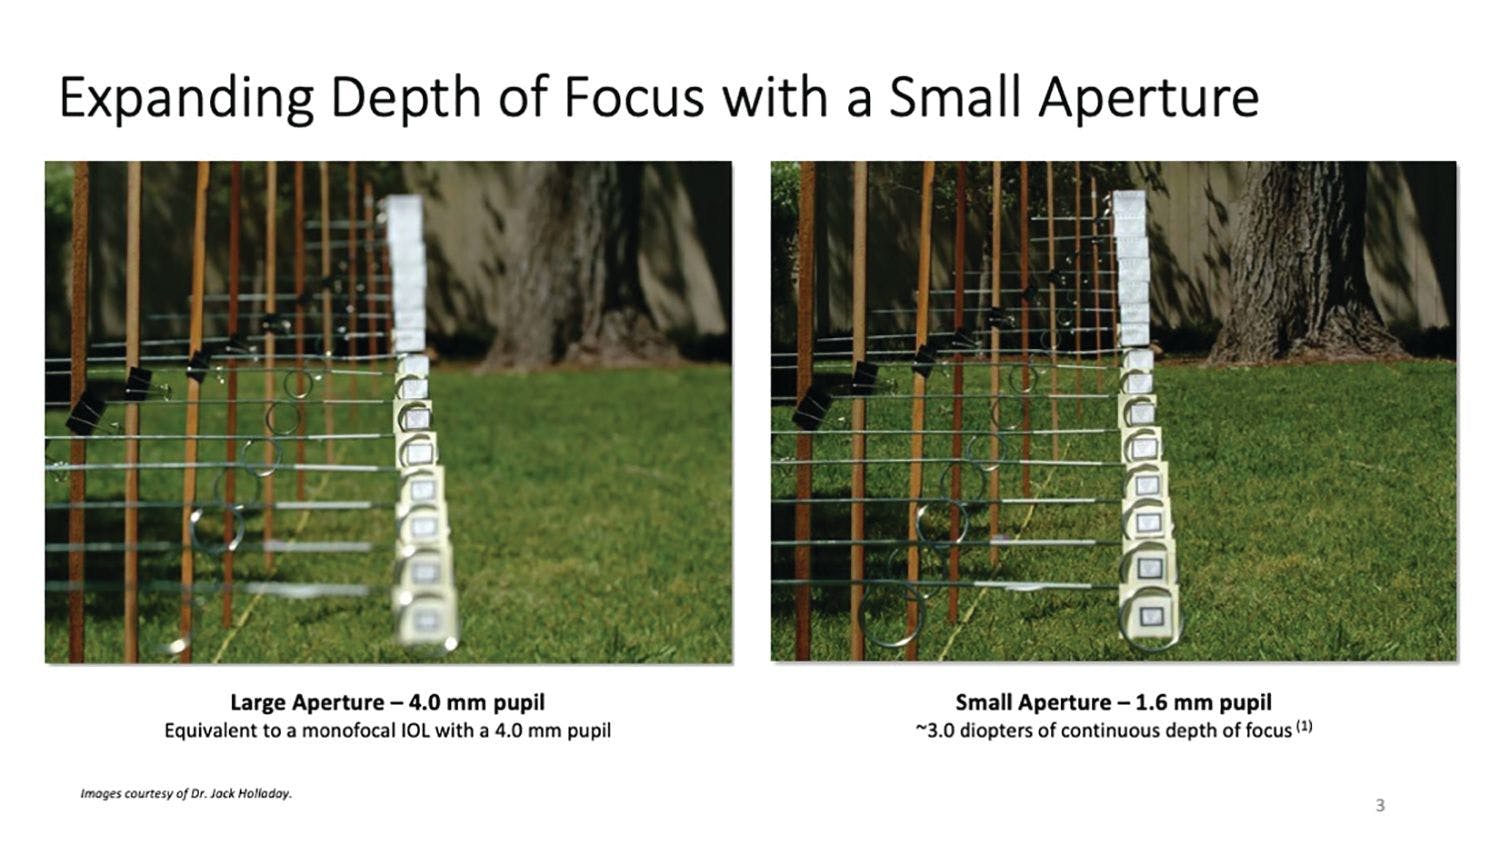 Figure 1. Depth of focus with a large aperture (equivalent to a 4.0-mm pupil) vs small aperture (equivalent to a 1.6-mm pupil) in a camera lens. (Images courtesy of Dr. Jack Holladay) 